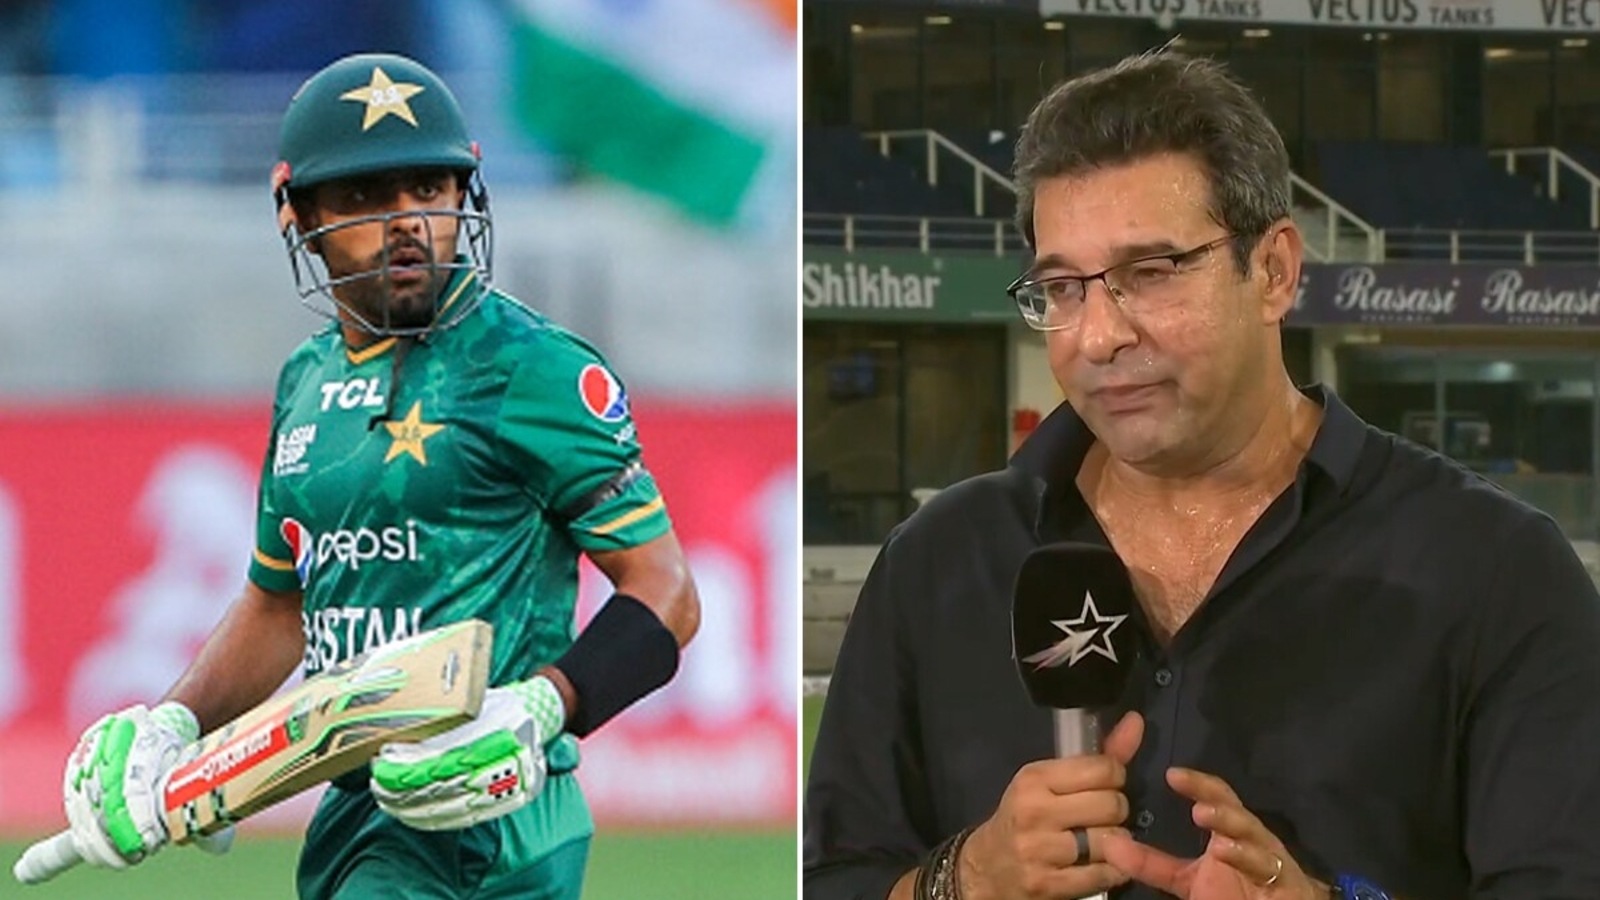 babar-azam-made-one-mistake-wasim-akram-identifies-big-error-that-cost-pakistan-asia-cup-match-against-india